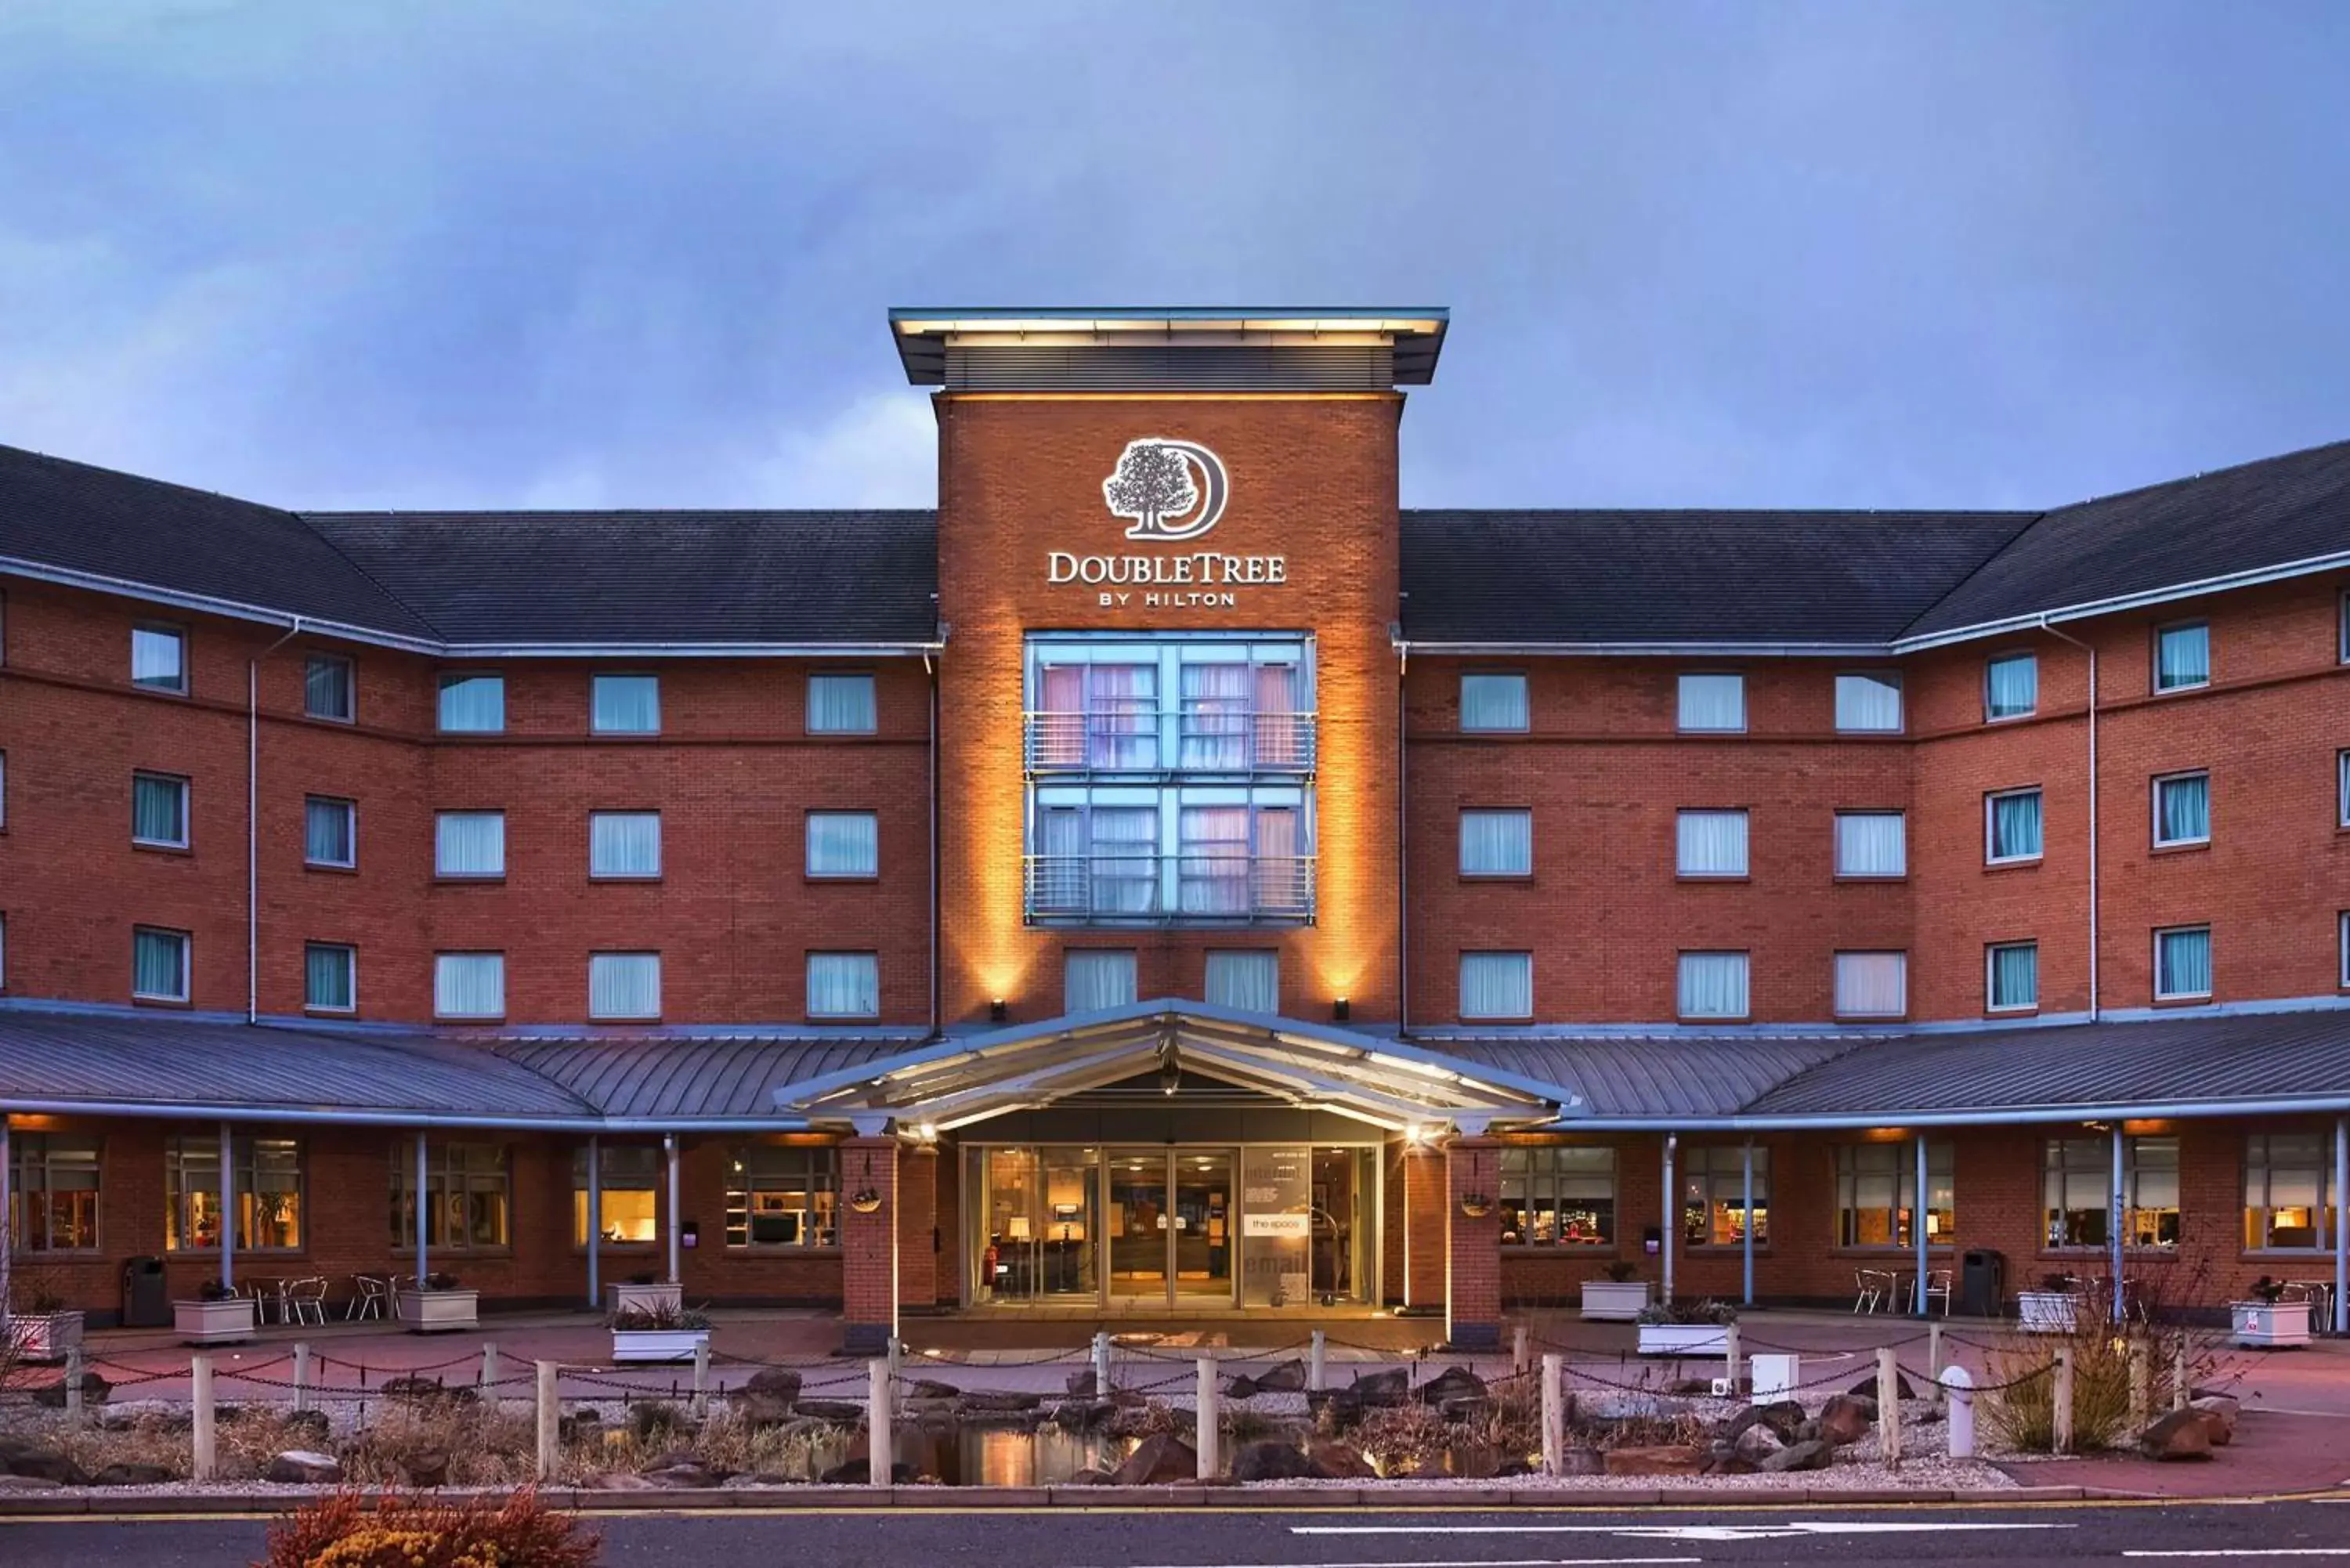 Property Building in Doubletree By Hilton Glasgow Strathclyde